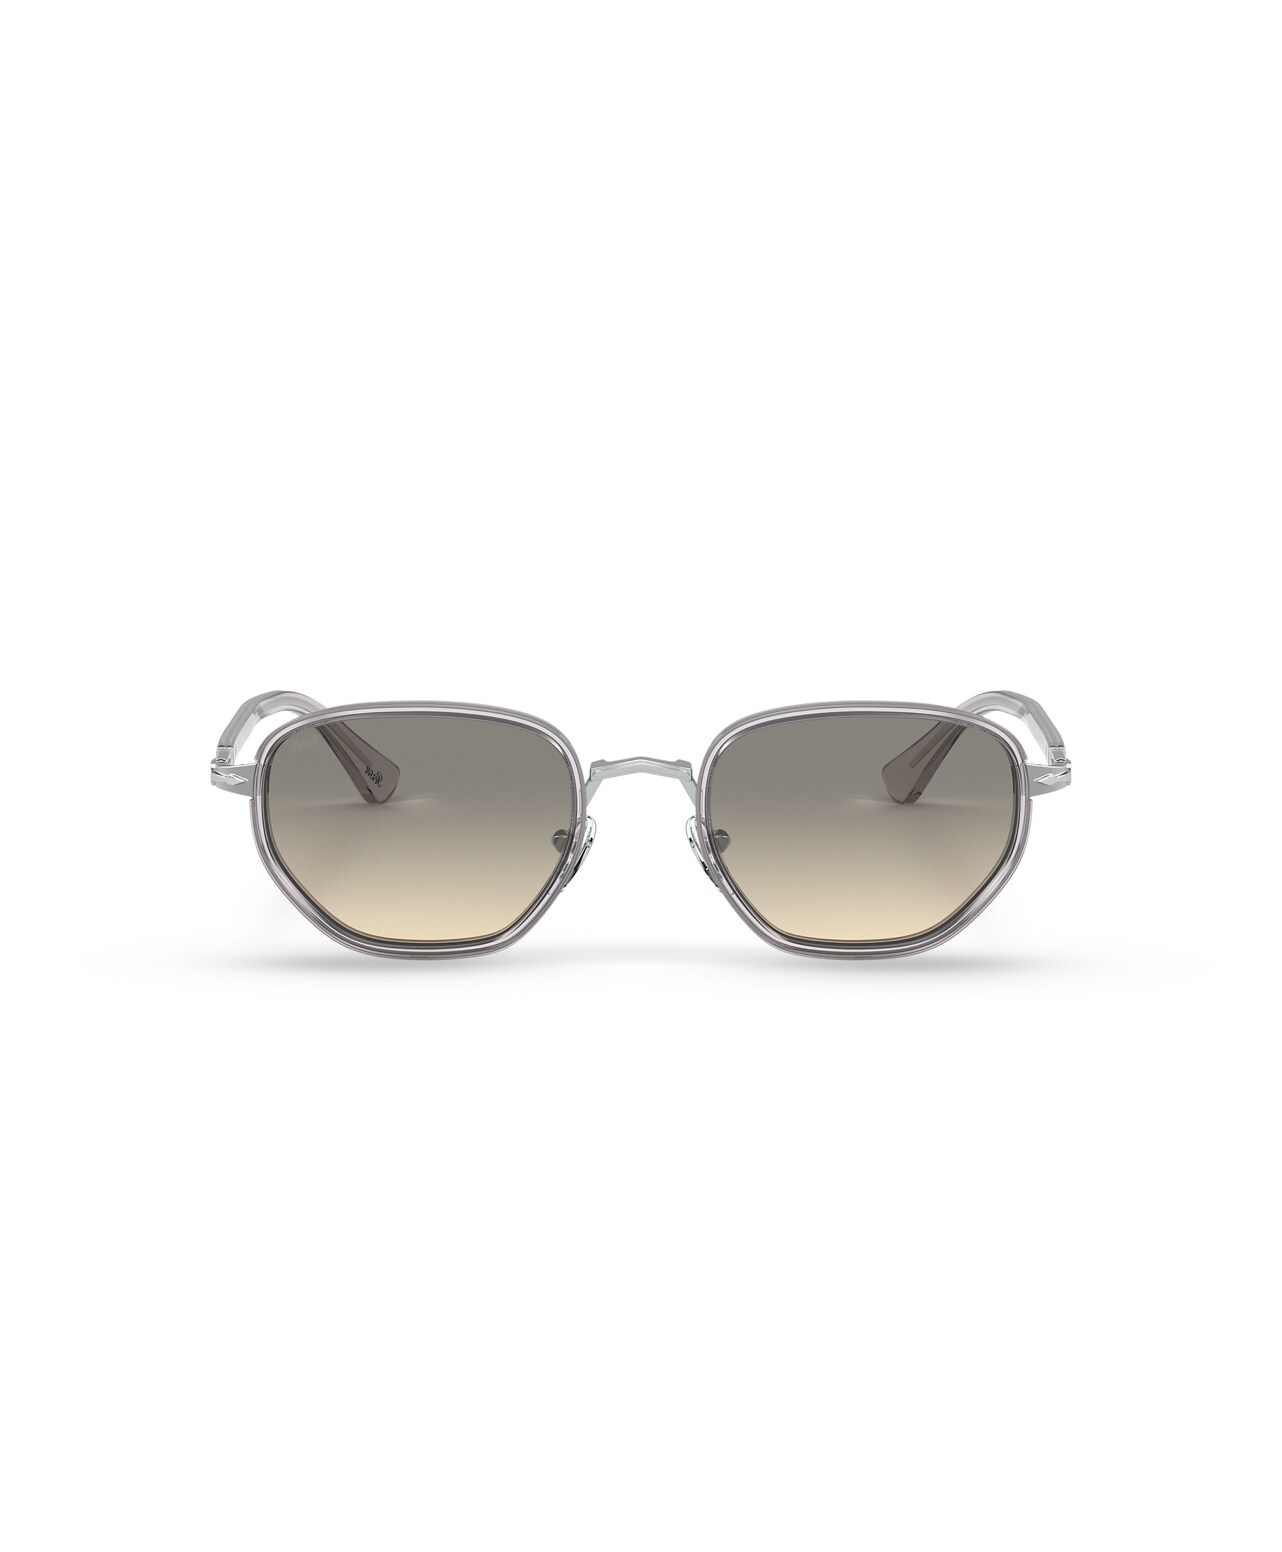 Persol sunglasses and eyeglasses | Persol Finland